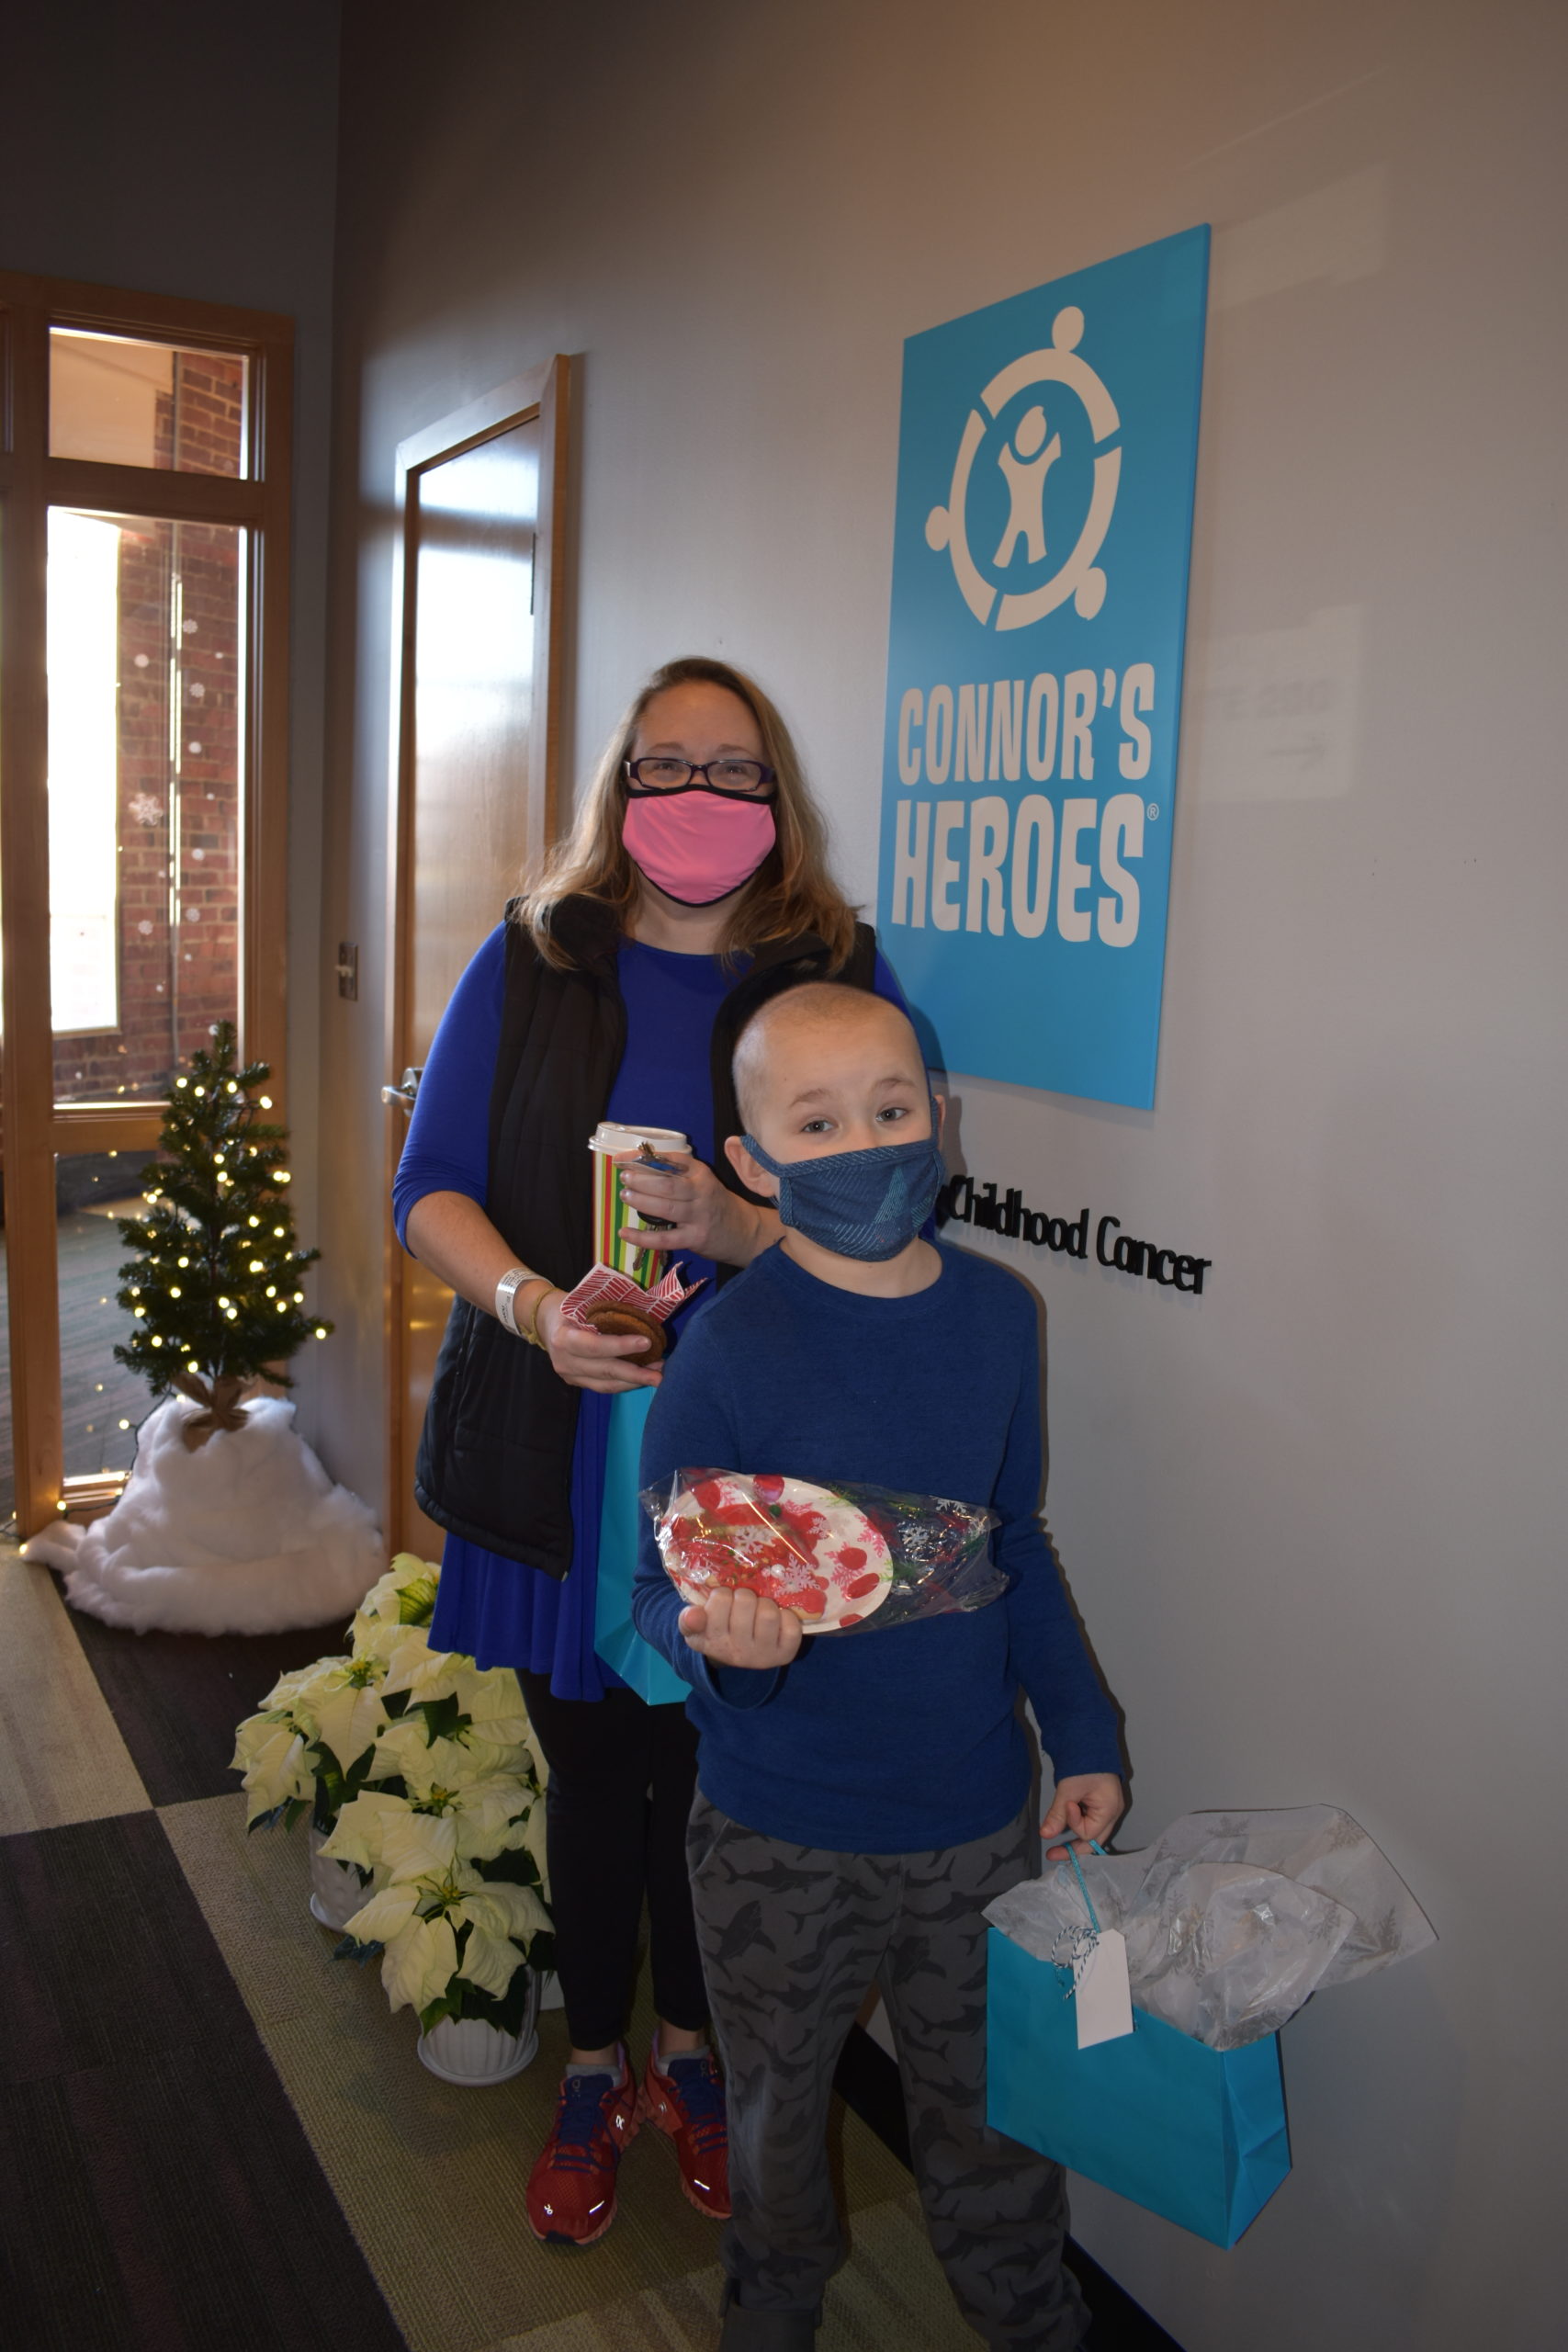 A mom stands with her son who is holding a plate of cookies and a gift bag full of presents